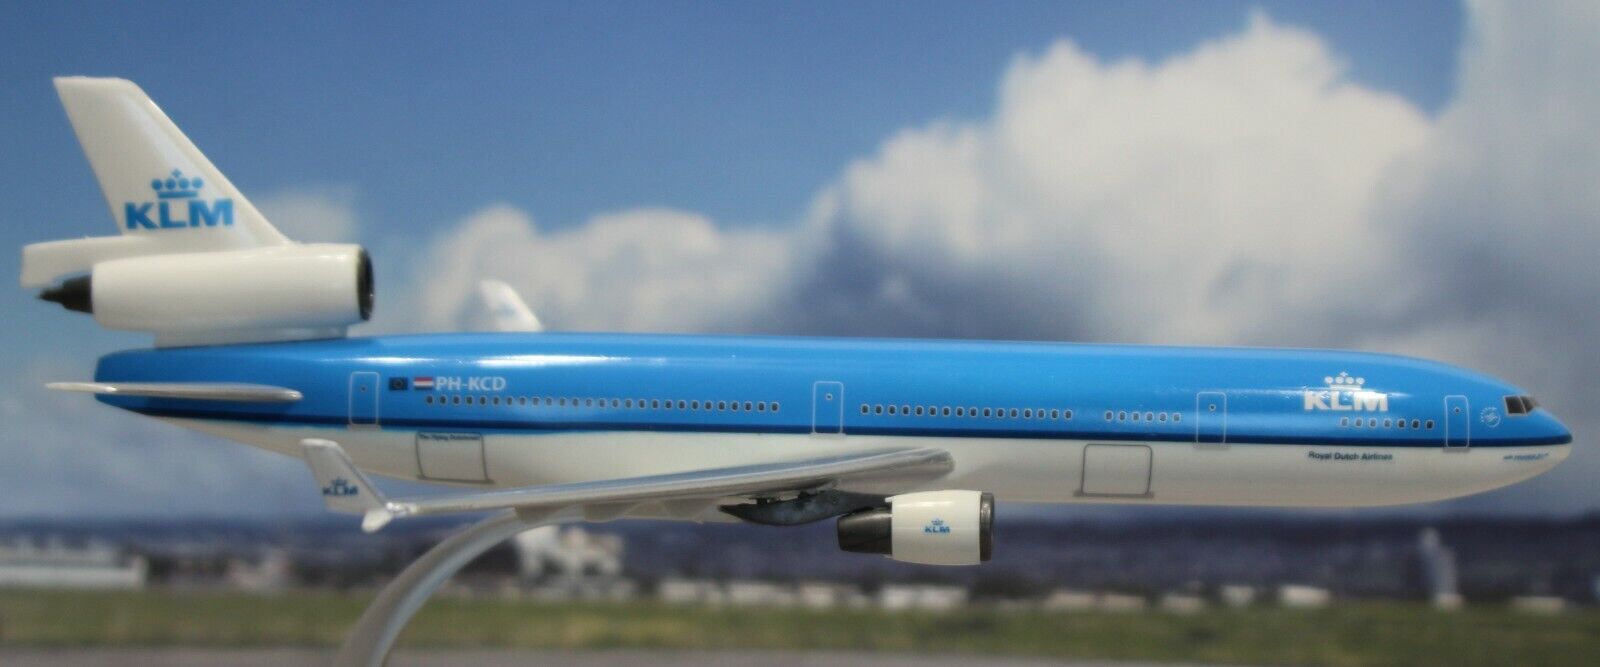 PPC Holland  McDonnell Douglas MD-11  KLM  Royal Dutch Airlines  1:200 Scale